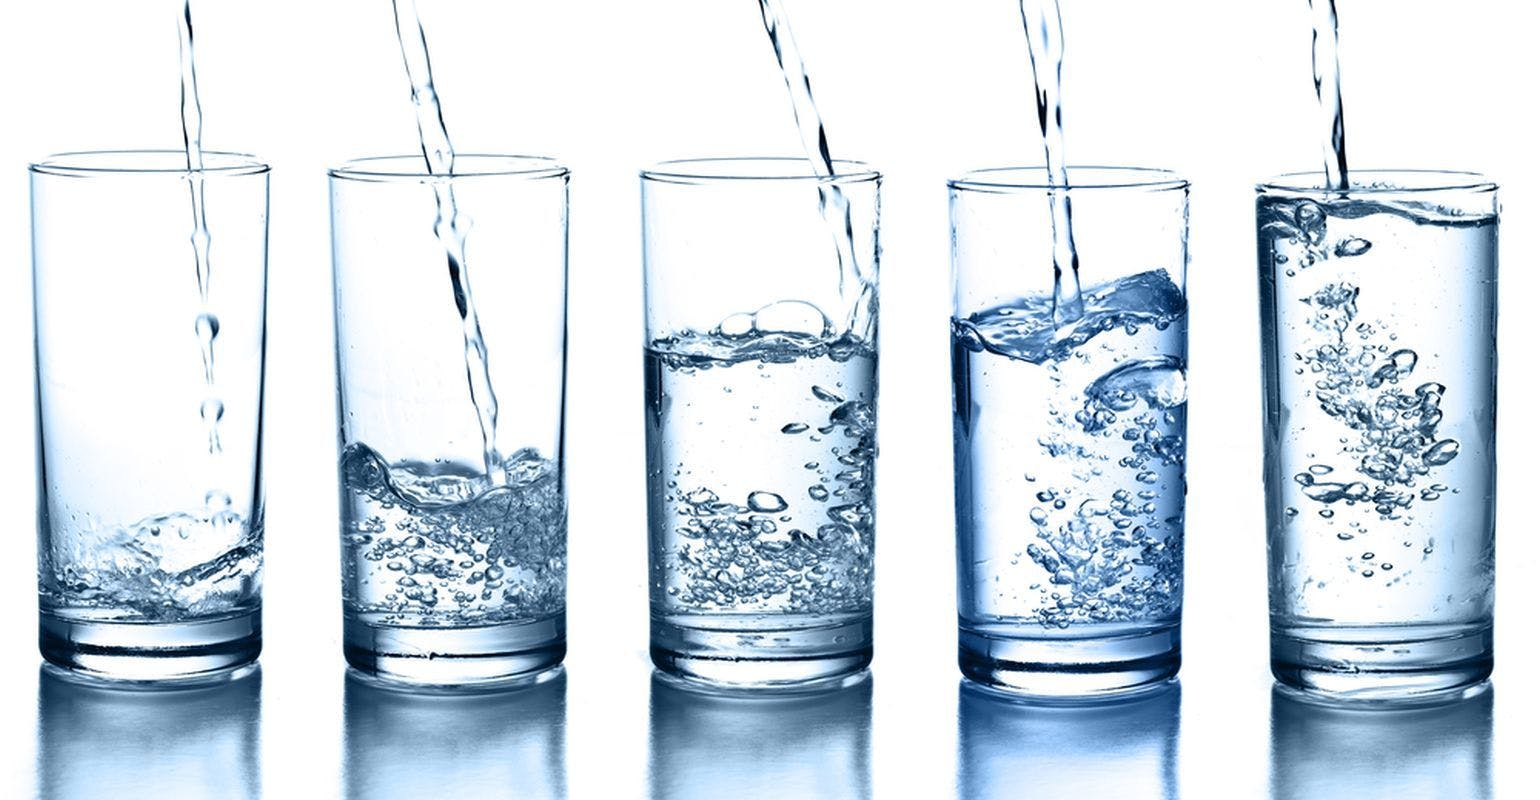 Drinking More Water Reduces Bladder Infections in Women